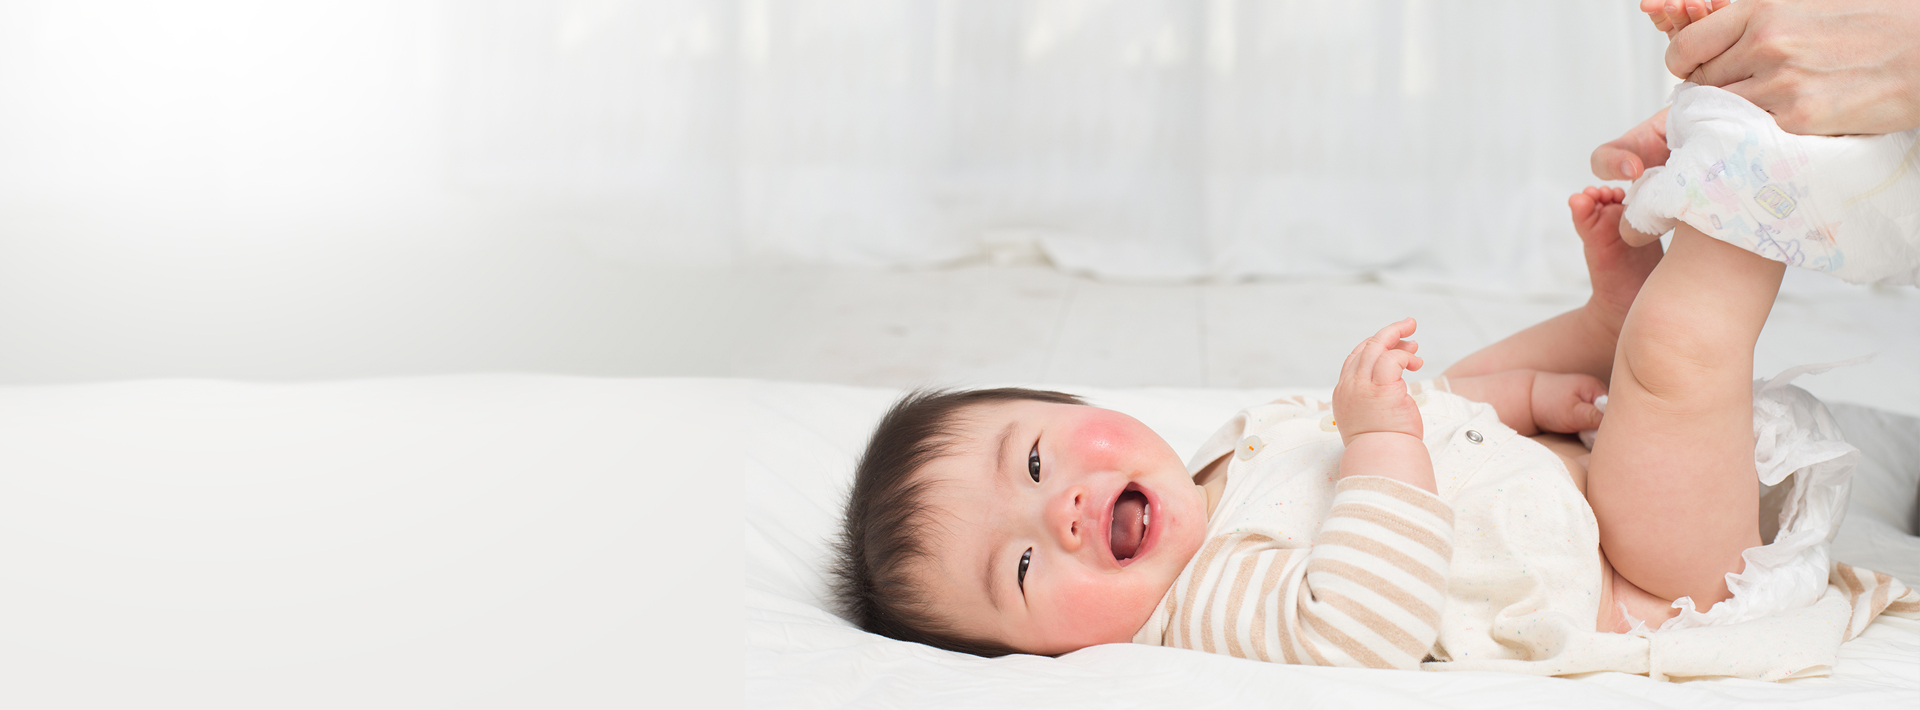 Nighttime Diaper Changes: How Often to Change Diapers